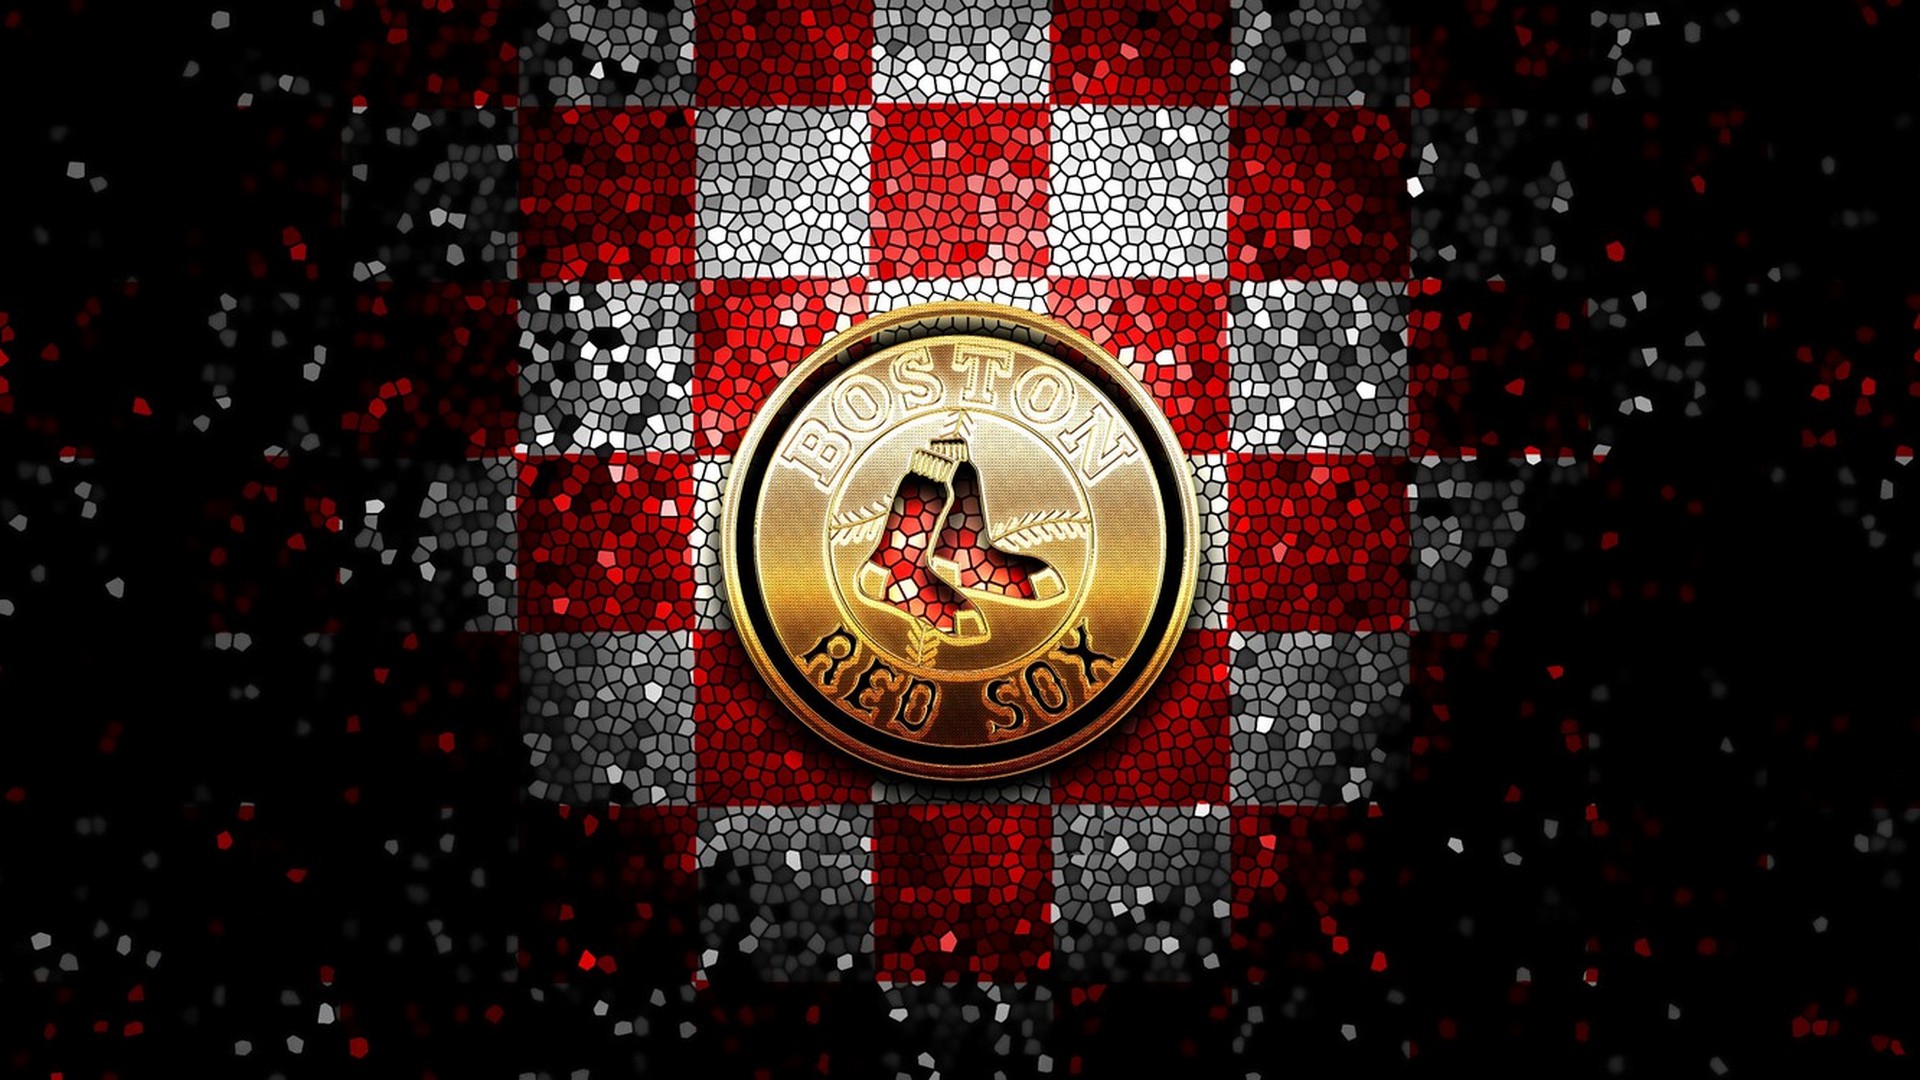 Red Sox 2021 Wallpapers - Wallpaper Cave